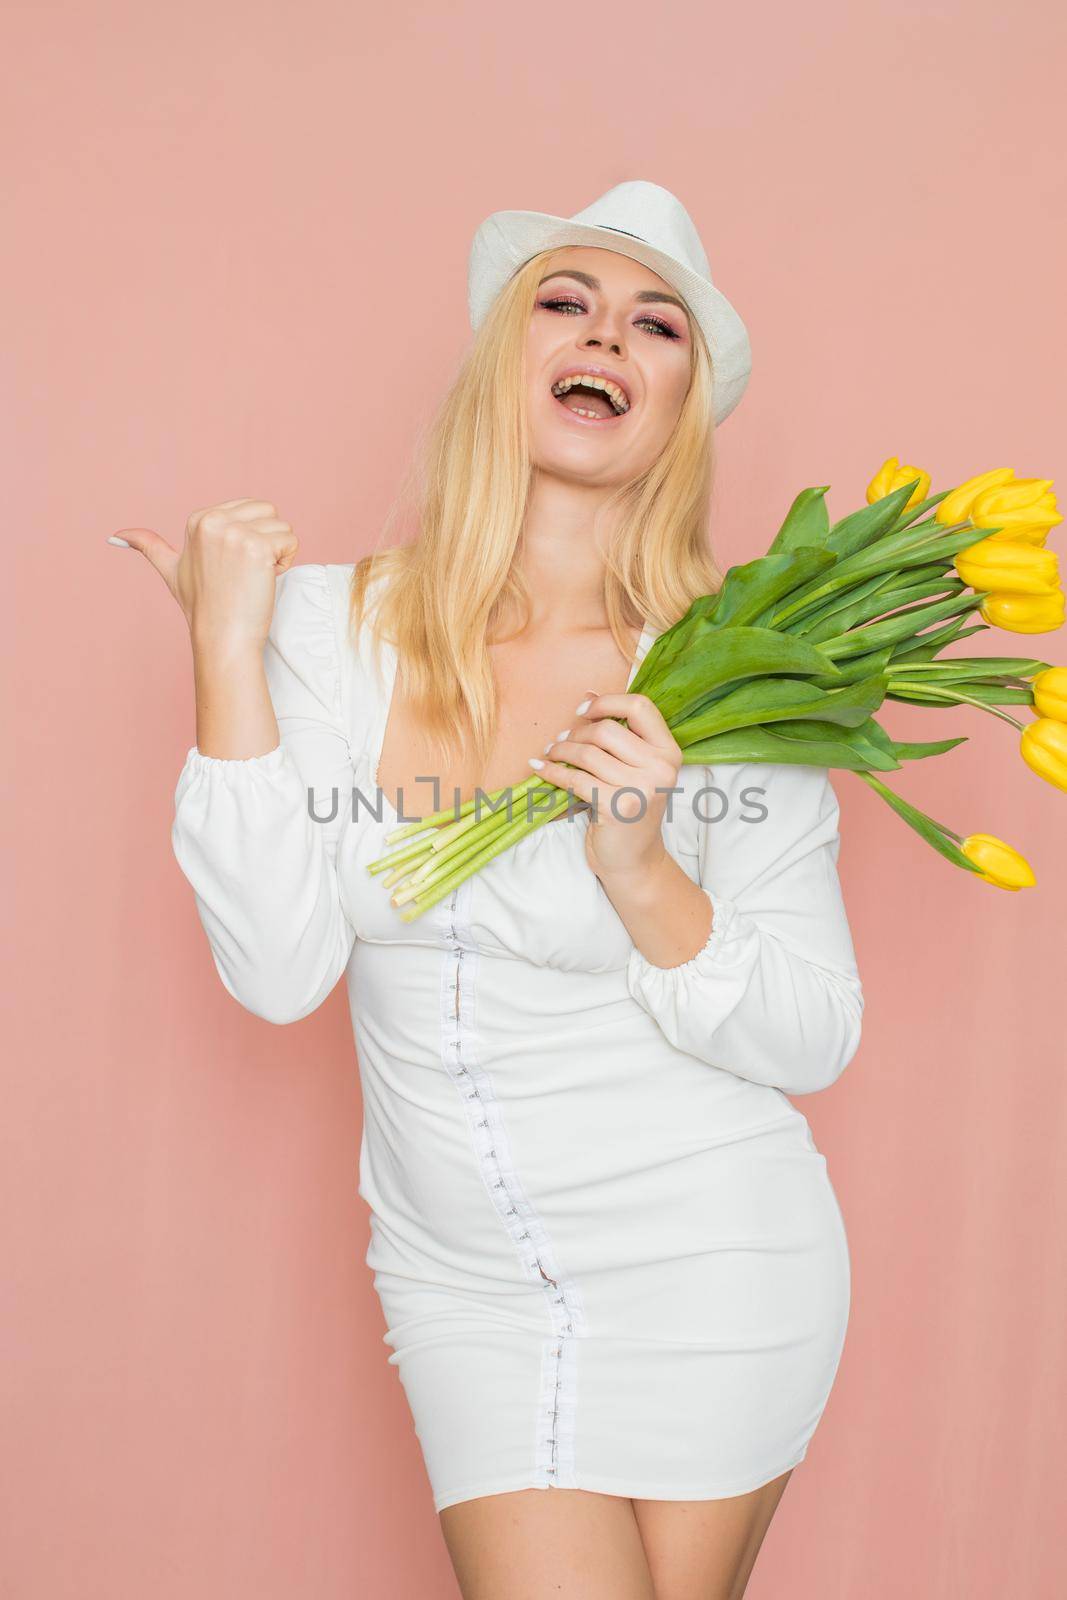 Woman in white dress and hat holding yellow tulips by Bonda